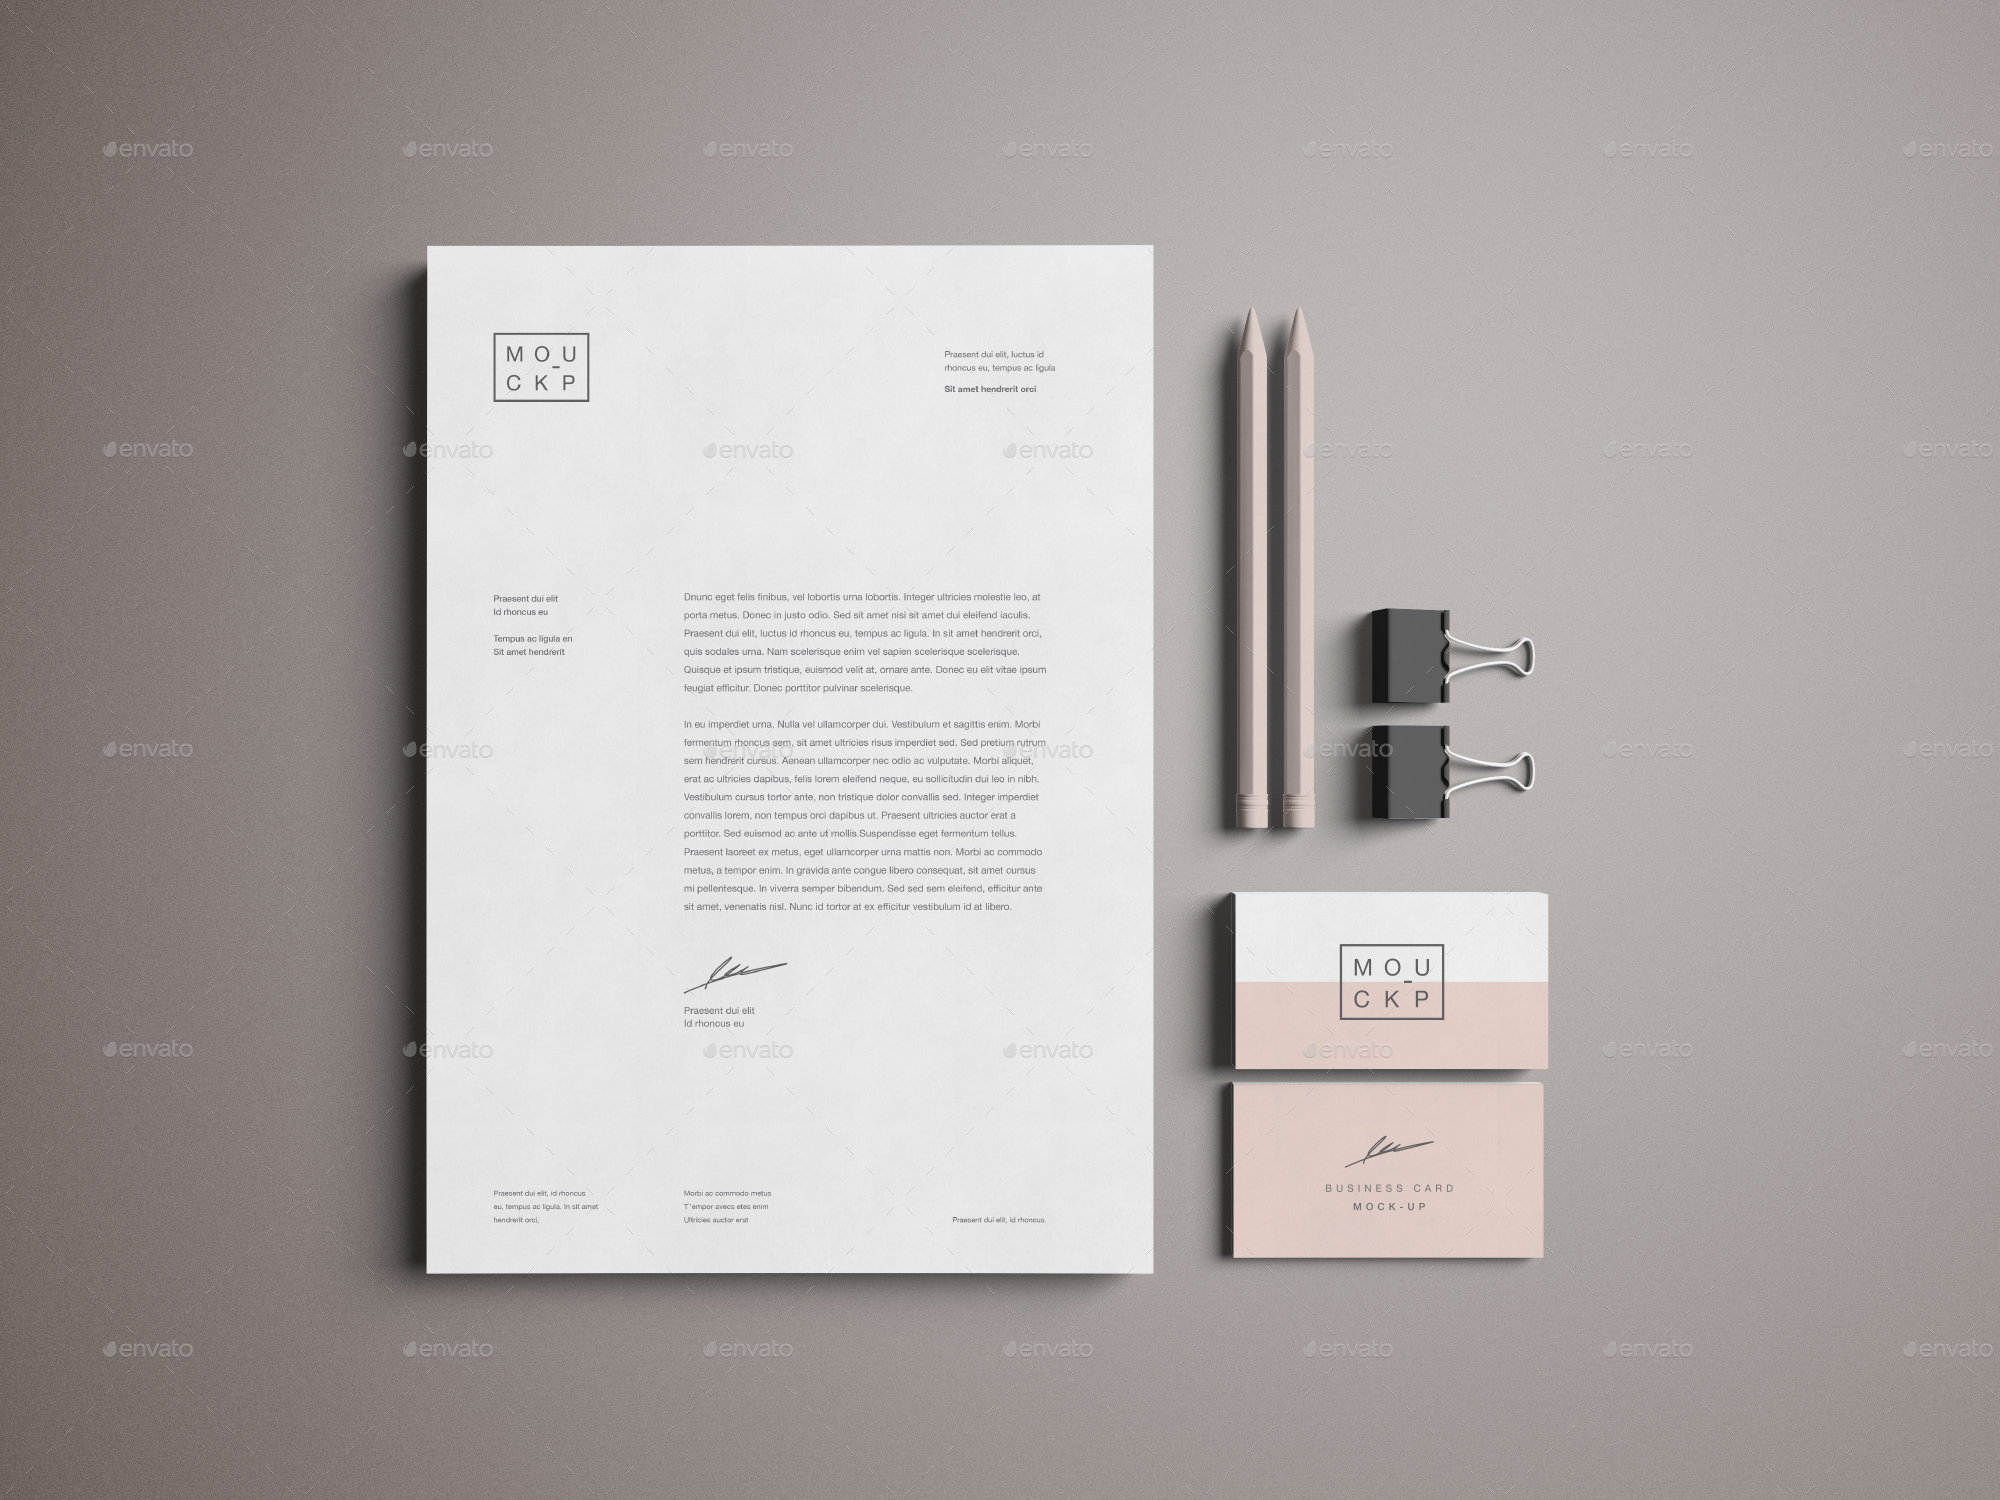 Download Stationery & Branding Mockup by blugraphic0 | GraphicRiver